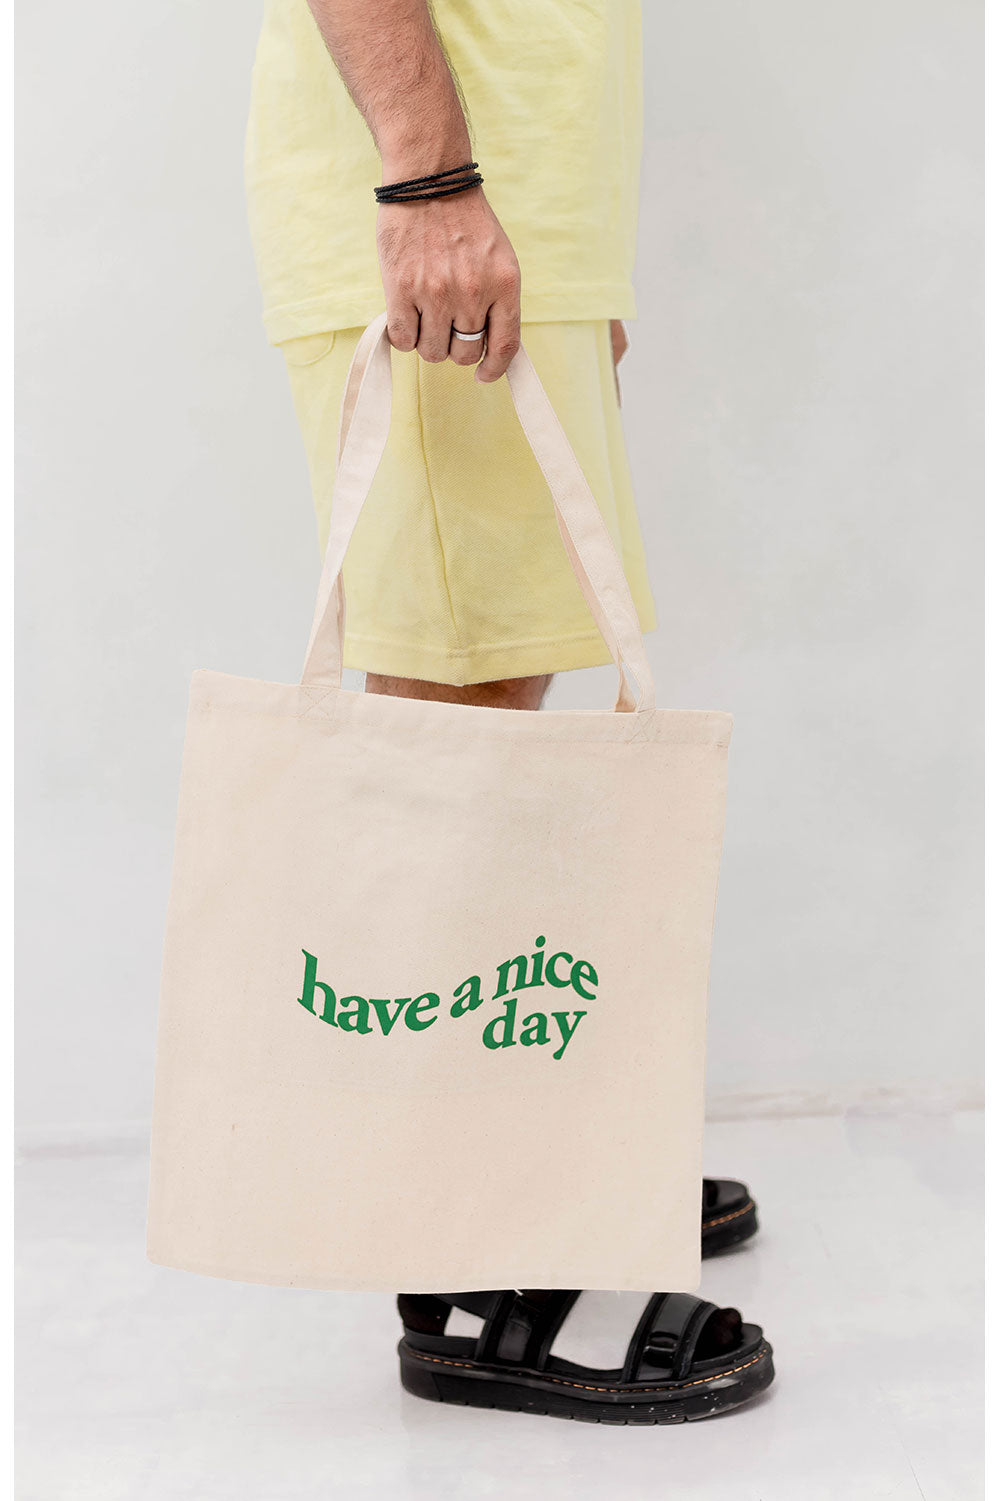 Tote bag with Print "Have a Nice Day" - Lahori Athleisure